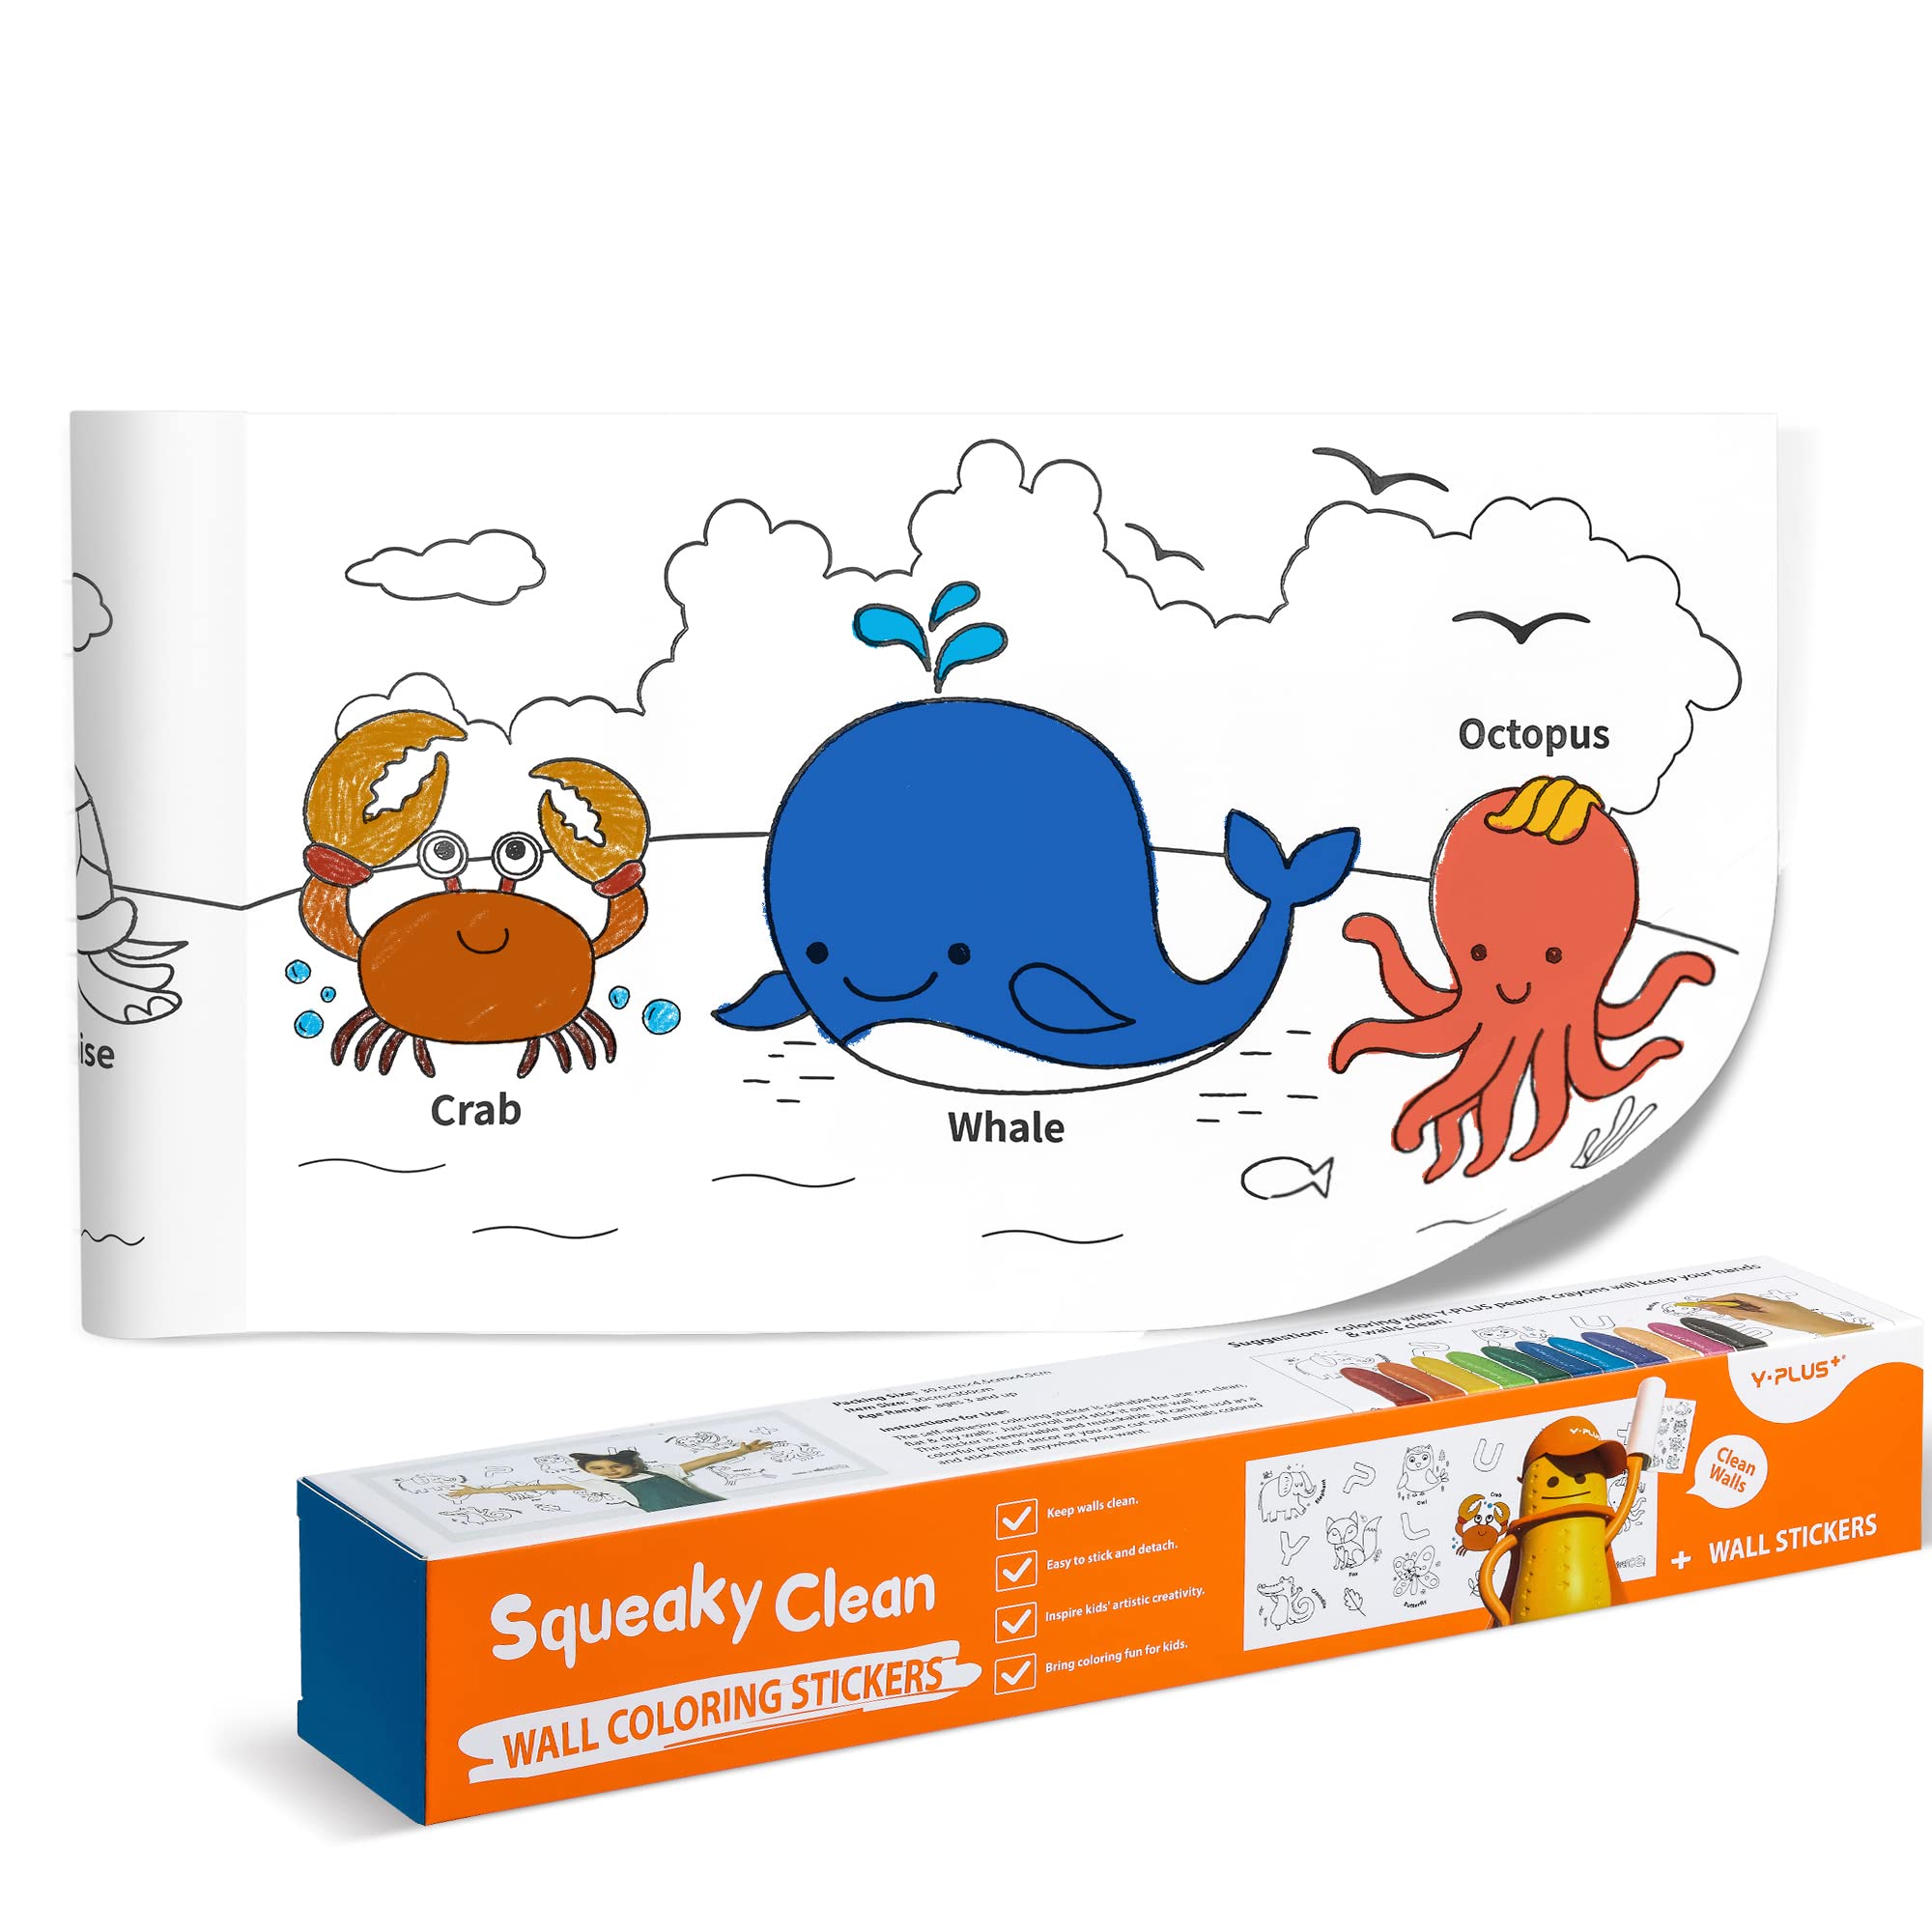 Kids Drawing Paper Large Coloring Roll From Continuous Continuous